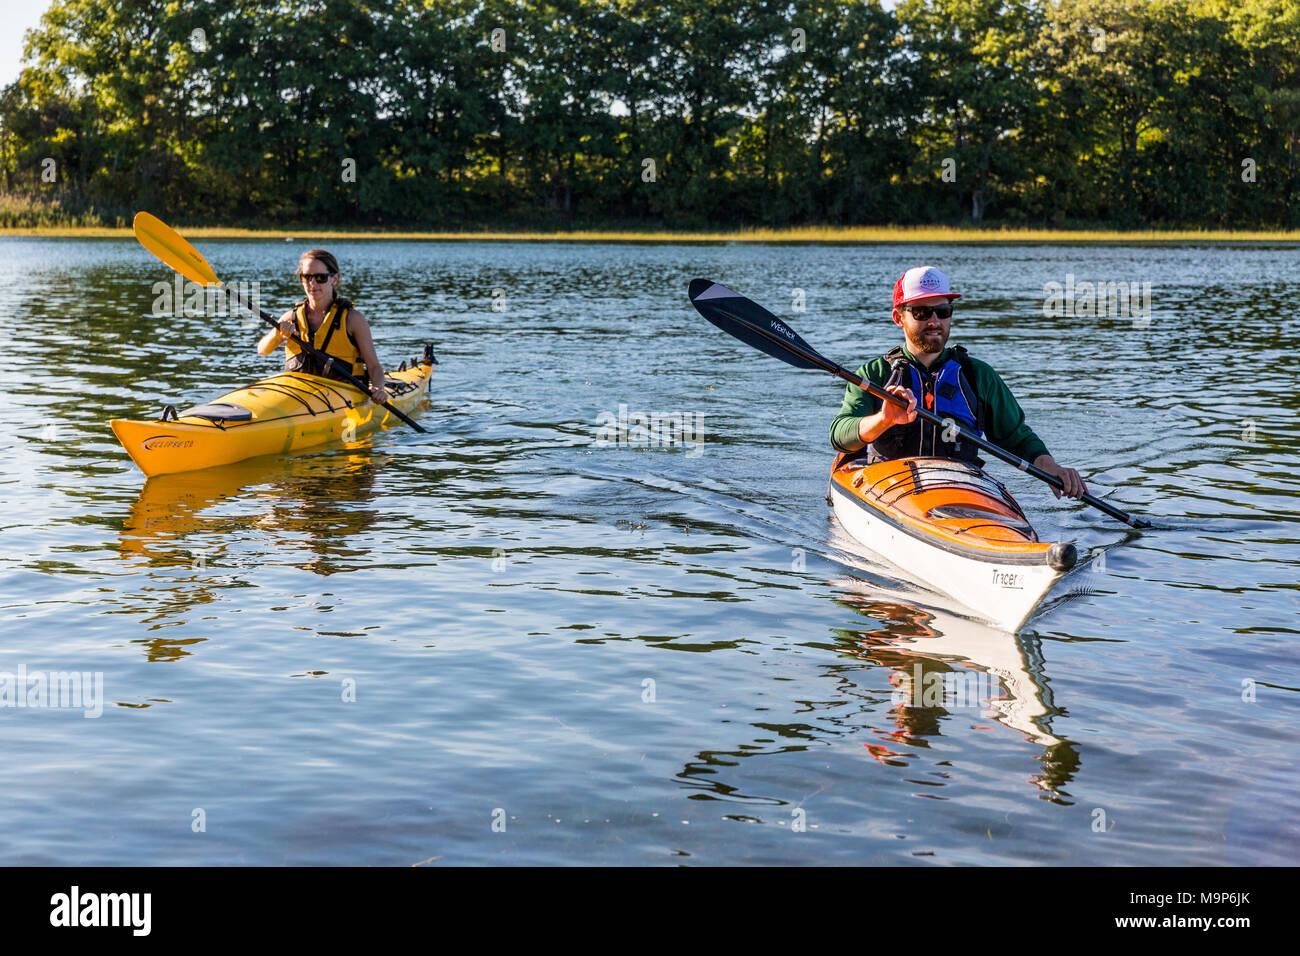 Kayakers on Essex River at Cox Reservation in Essex, Massachusetts Stock Photo